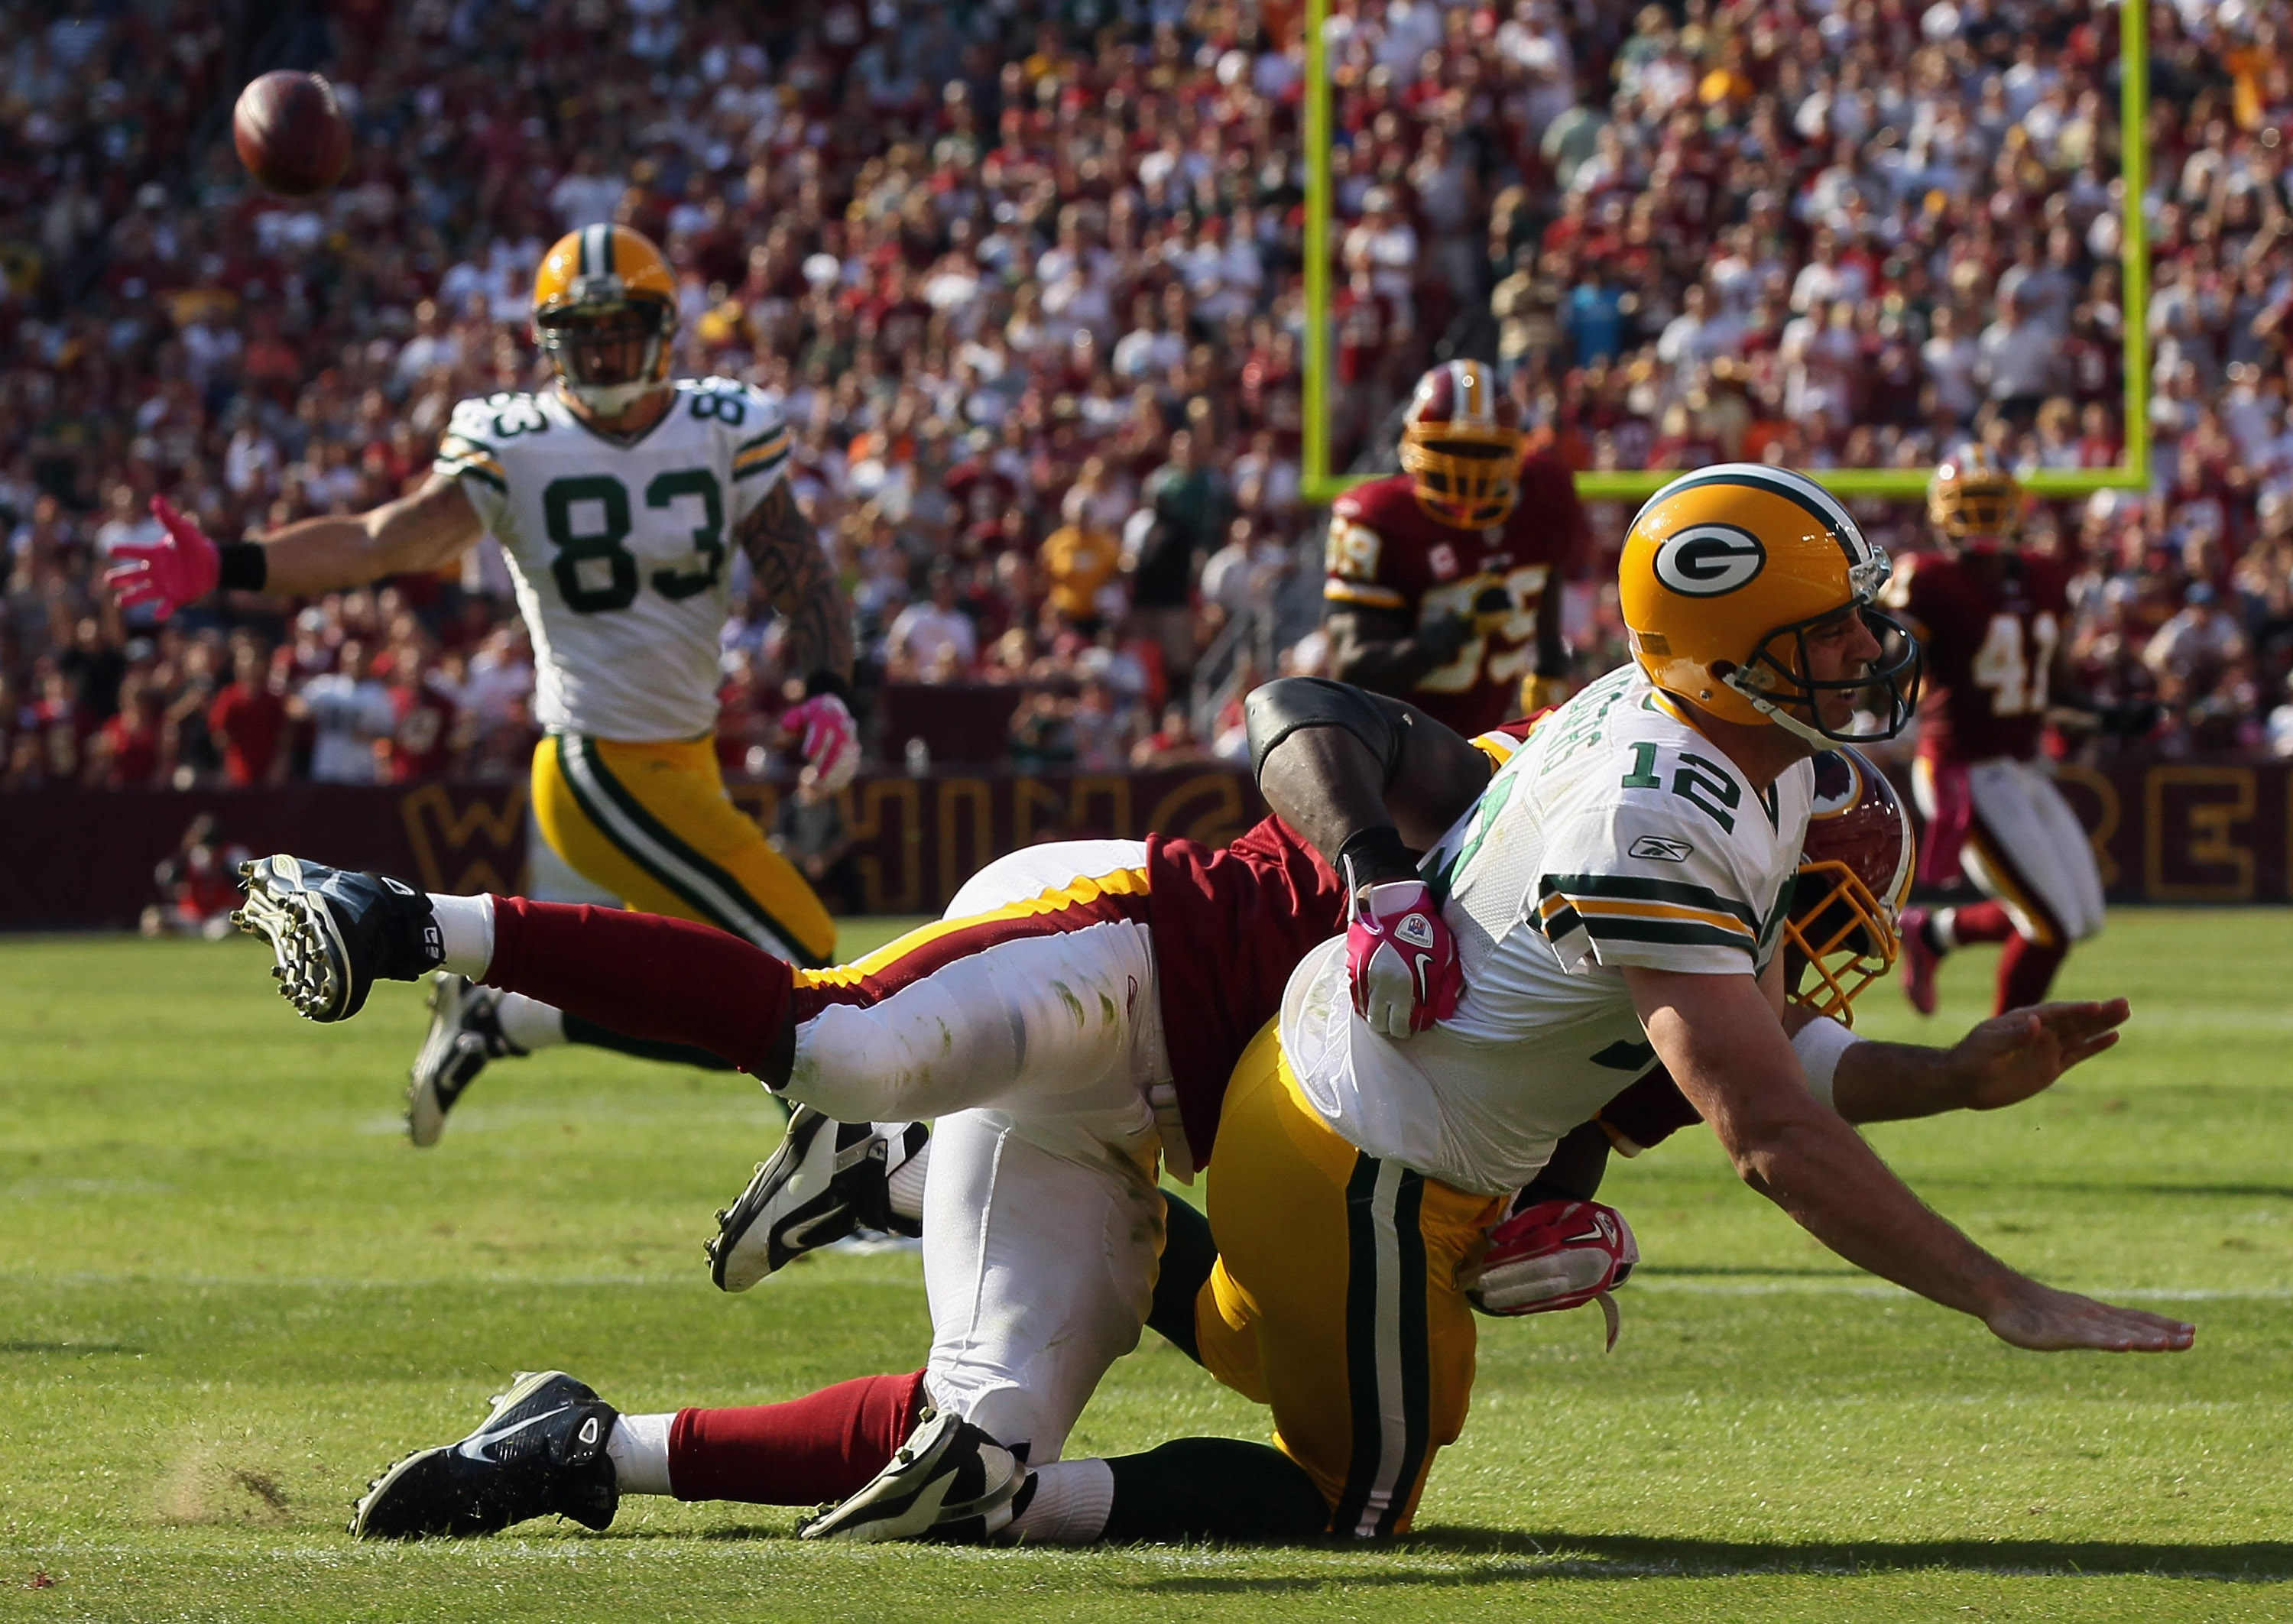 LANDOVER, MD - OCTOBER 10:  Quarterback Aaron Rodgers #12 of the Green Bay Packers is taken to the ground by lineback Brian Orakpo #98 of the Washington Redskins in the fourth quarter at FedExField on October 10, 2010 in Landover, Maryland. The Redskins w